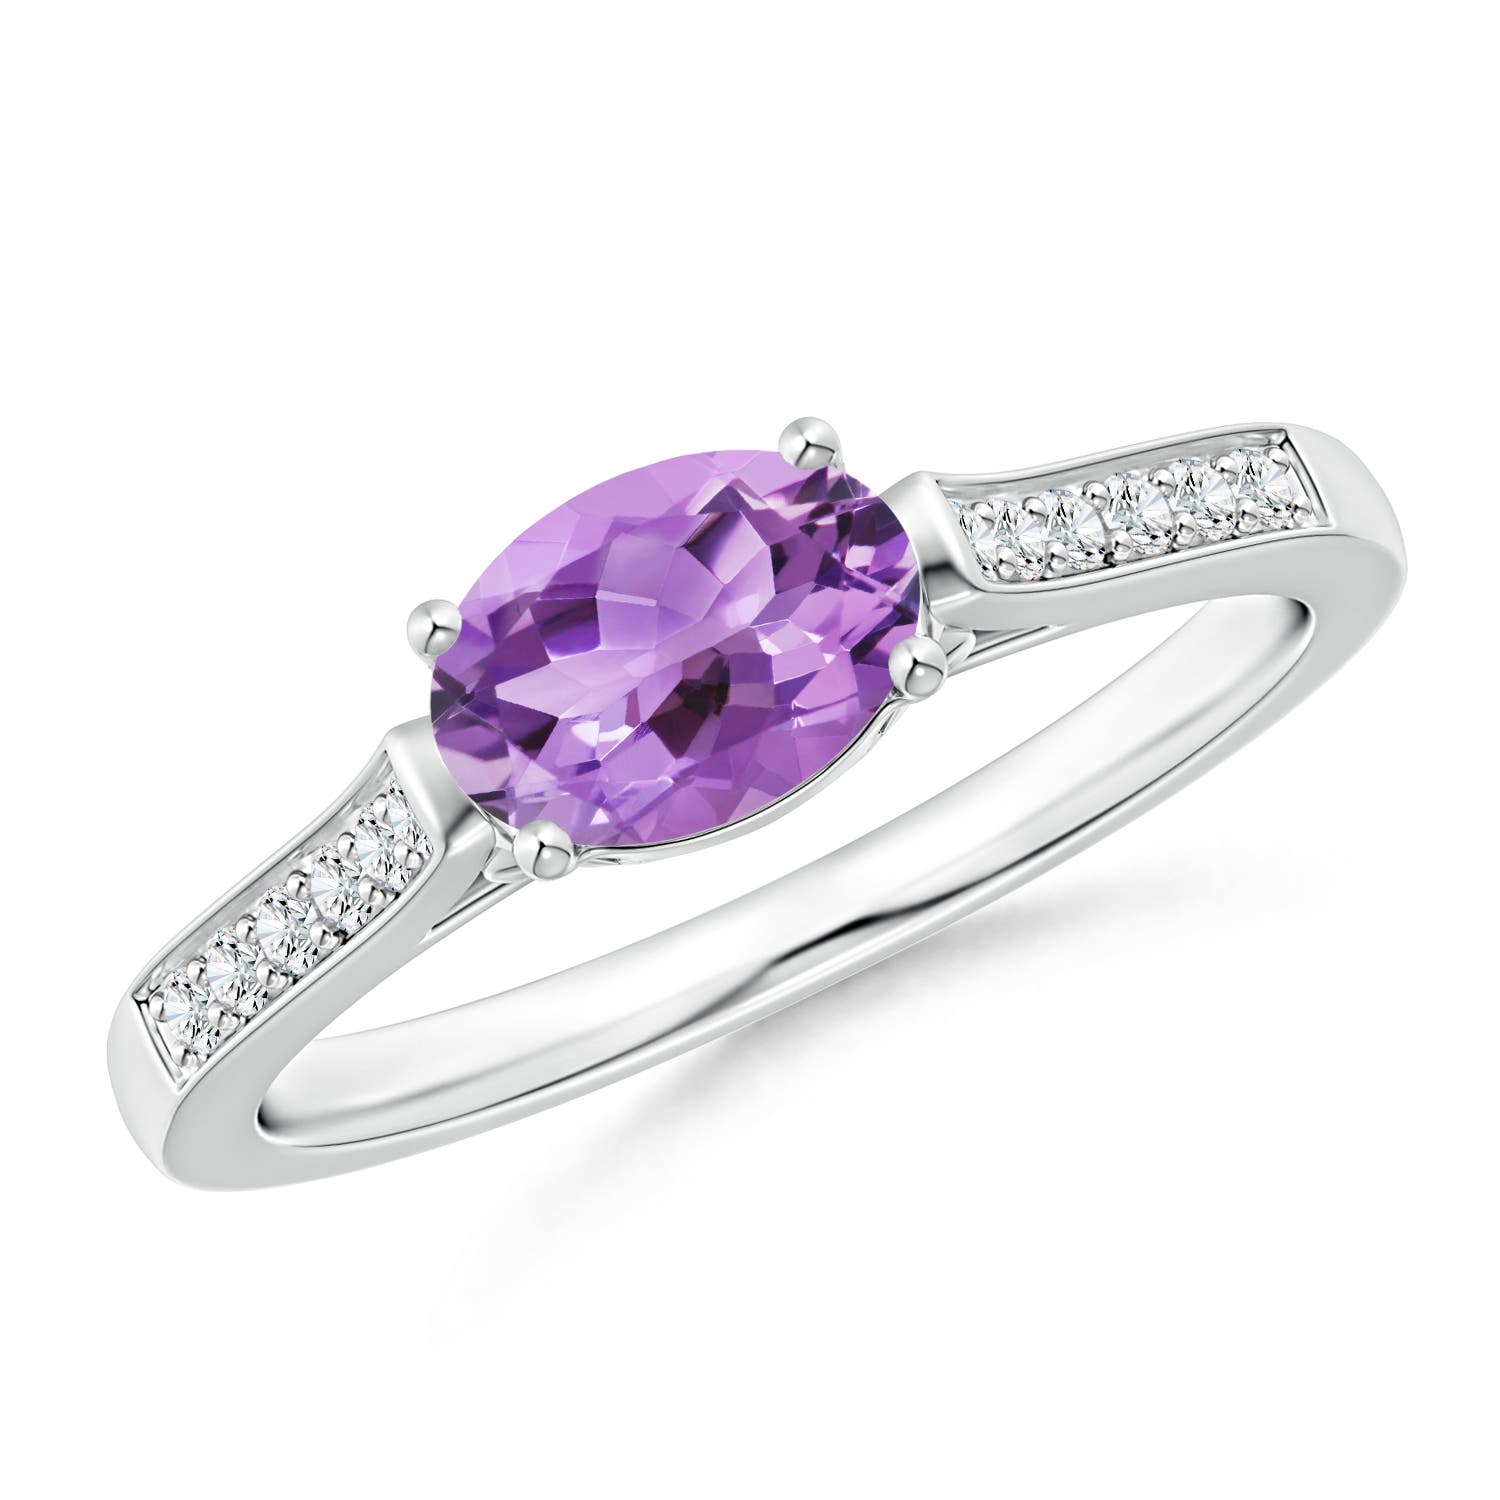 A - Amethyst / 0.82 CT / 14 KT White Gold